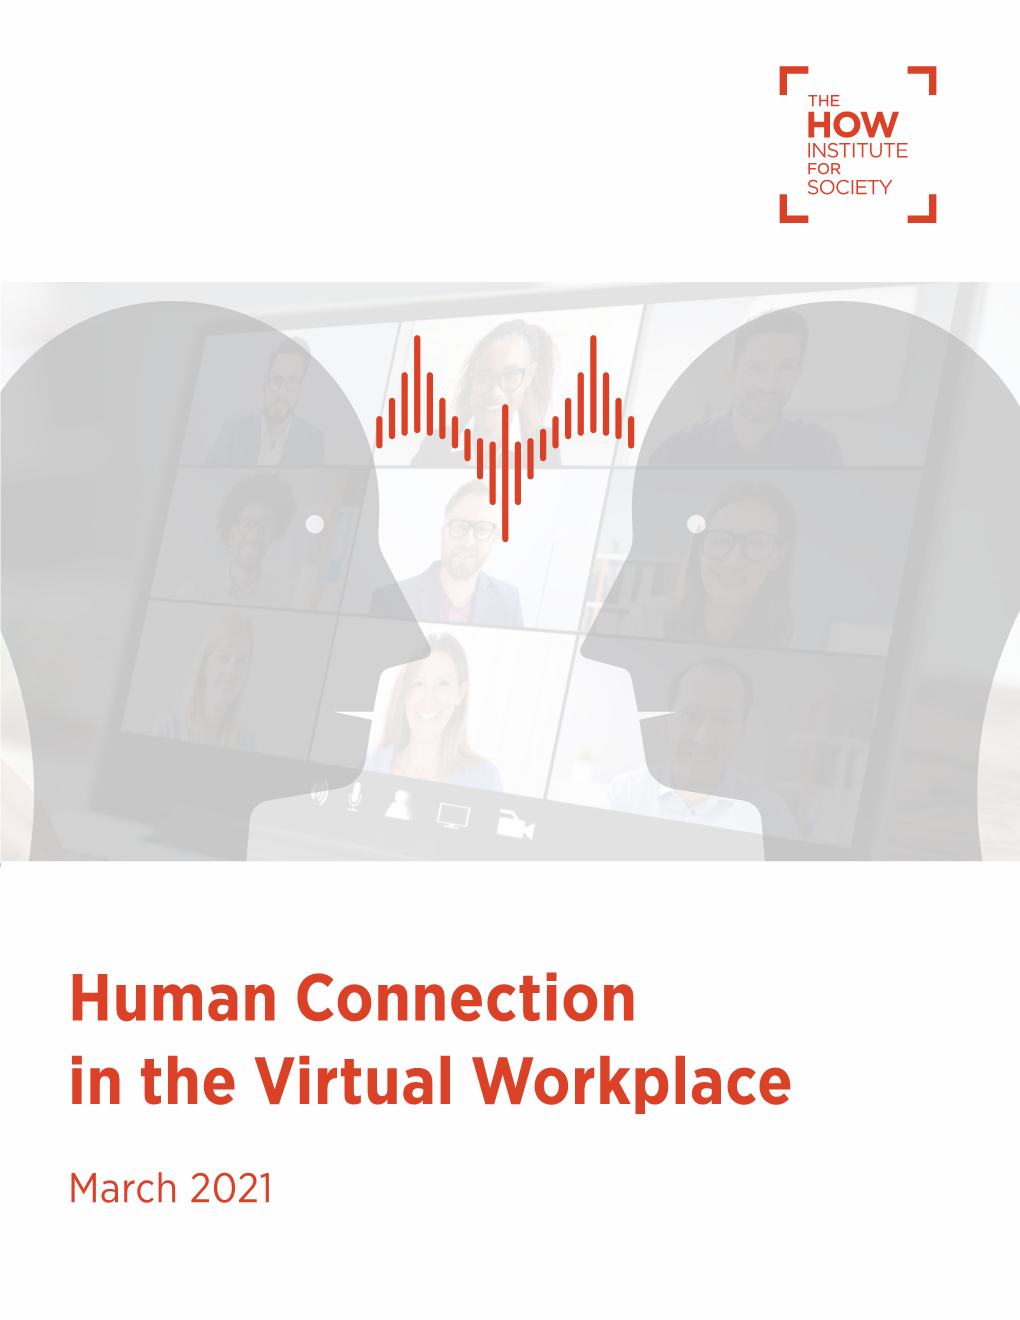 Human Connection in the Virtual Workplace